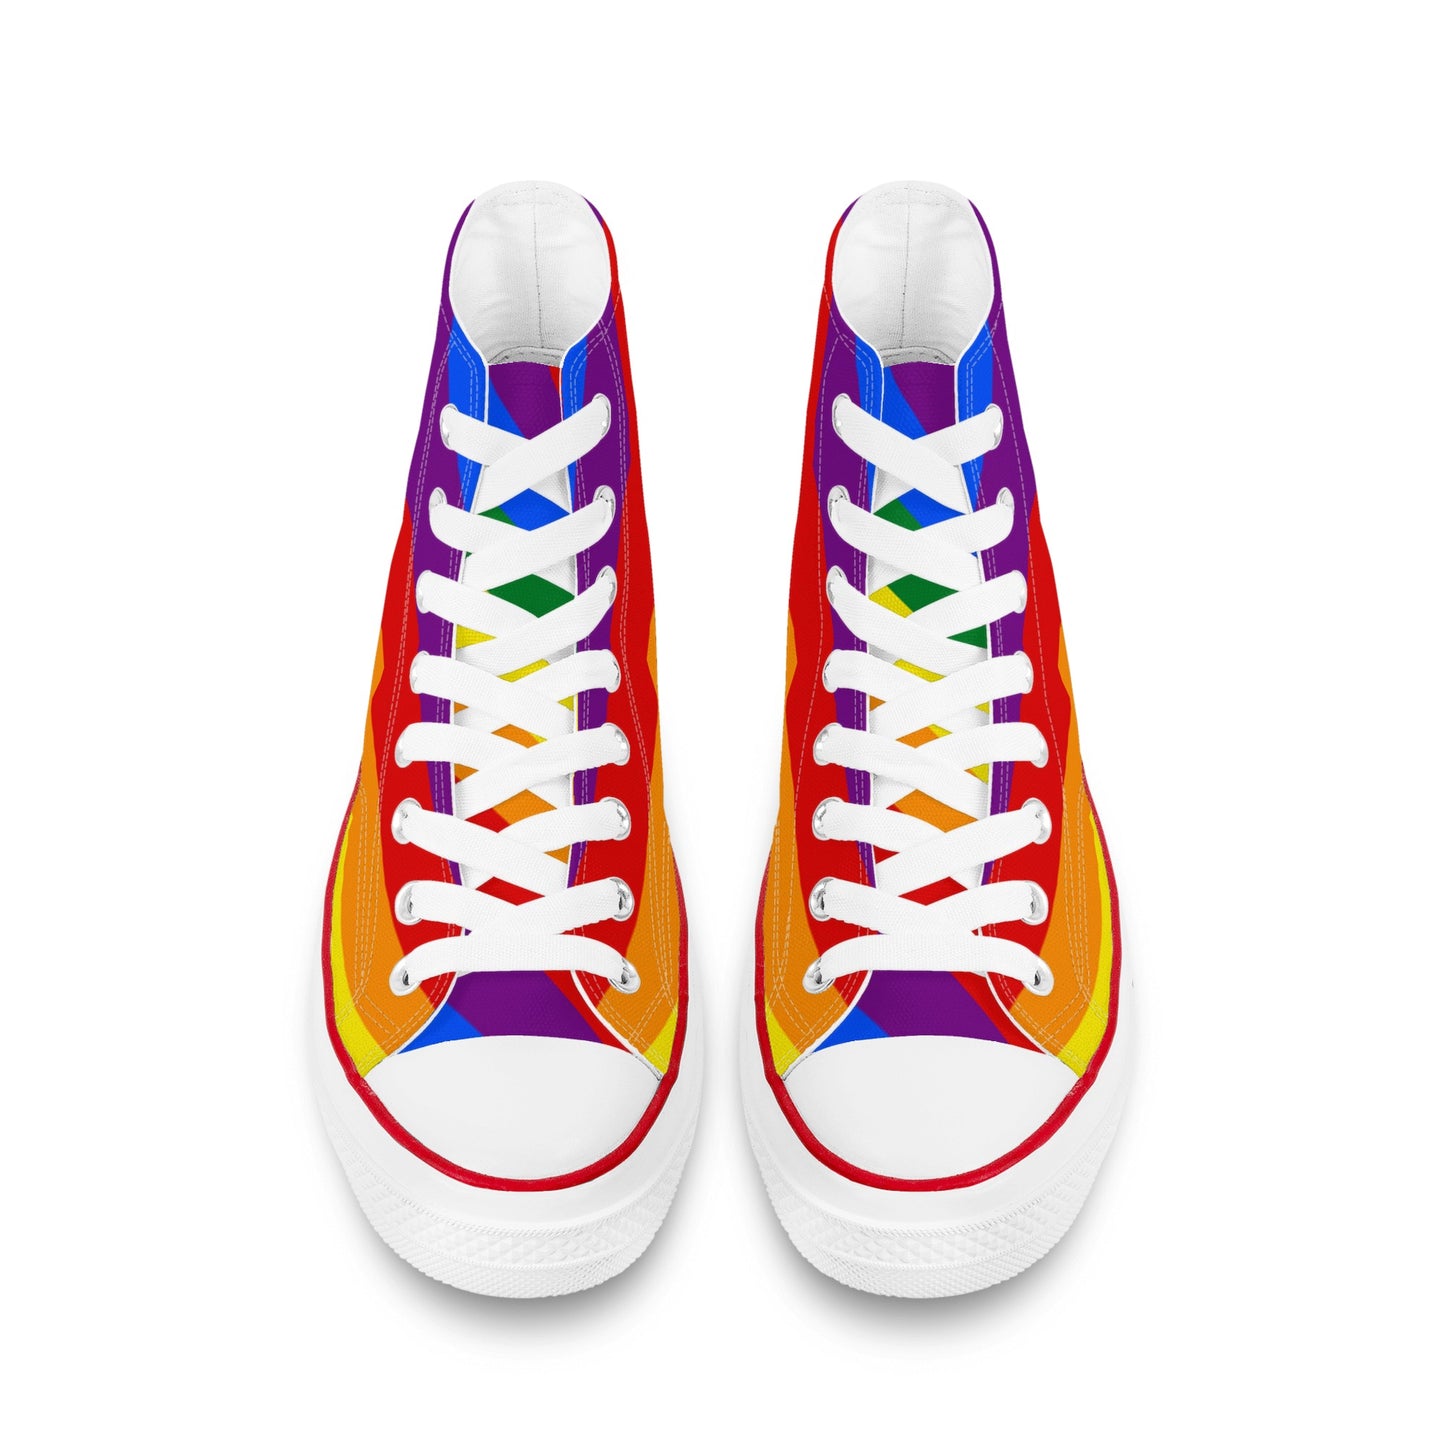 Rainbow Pride Collection - Mens Classic High Top Canvas Shoes for the LGBTQIA+ community